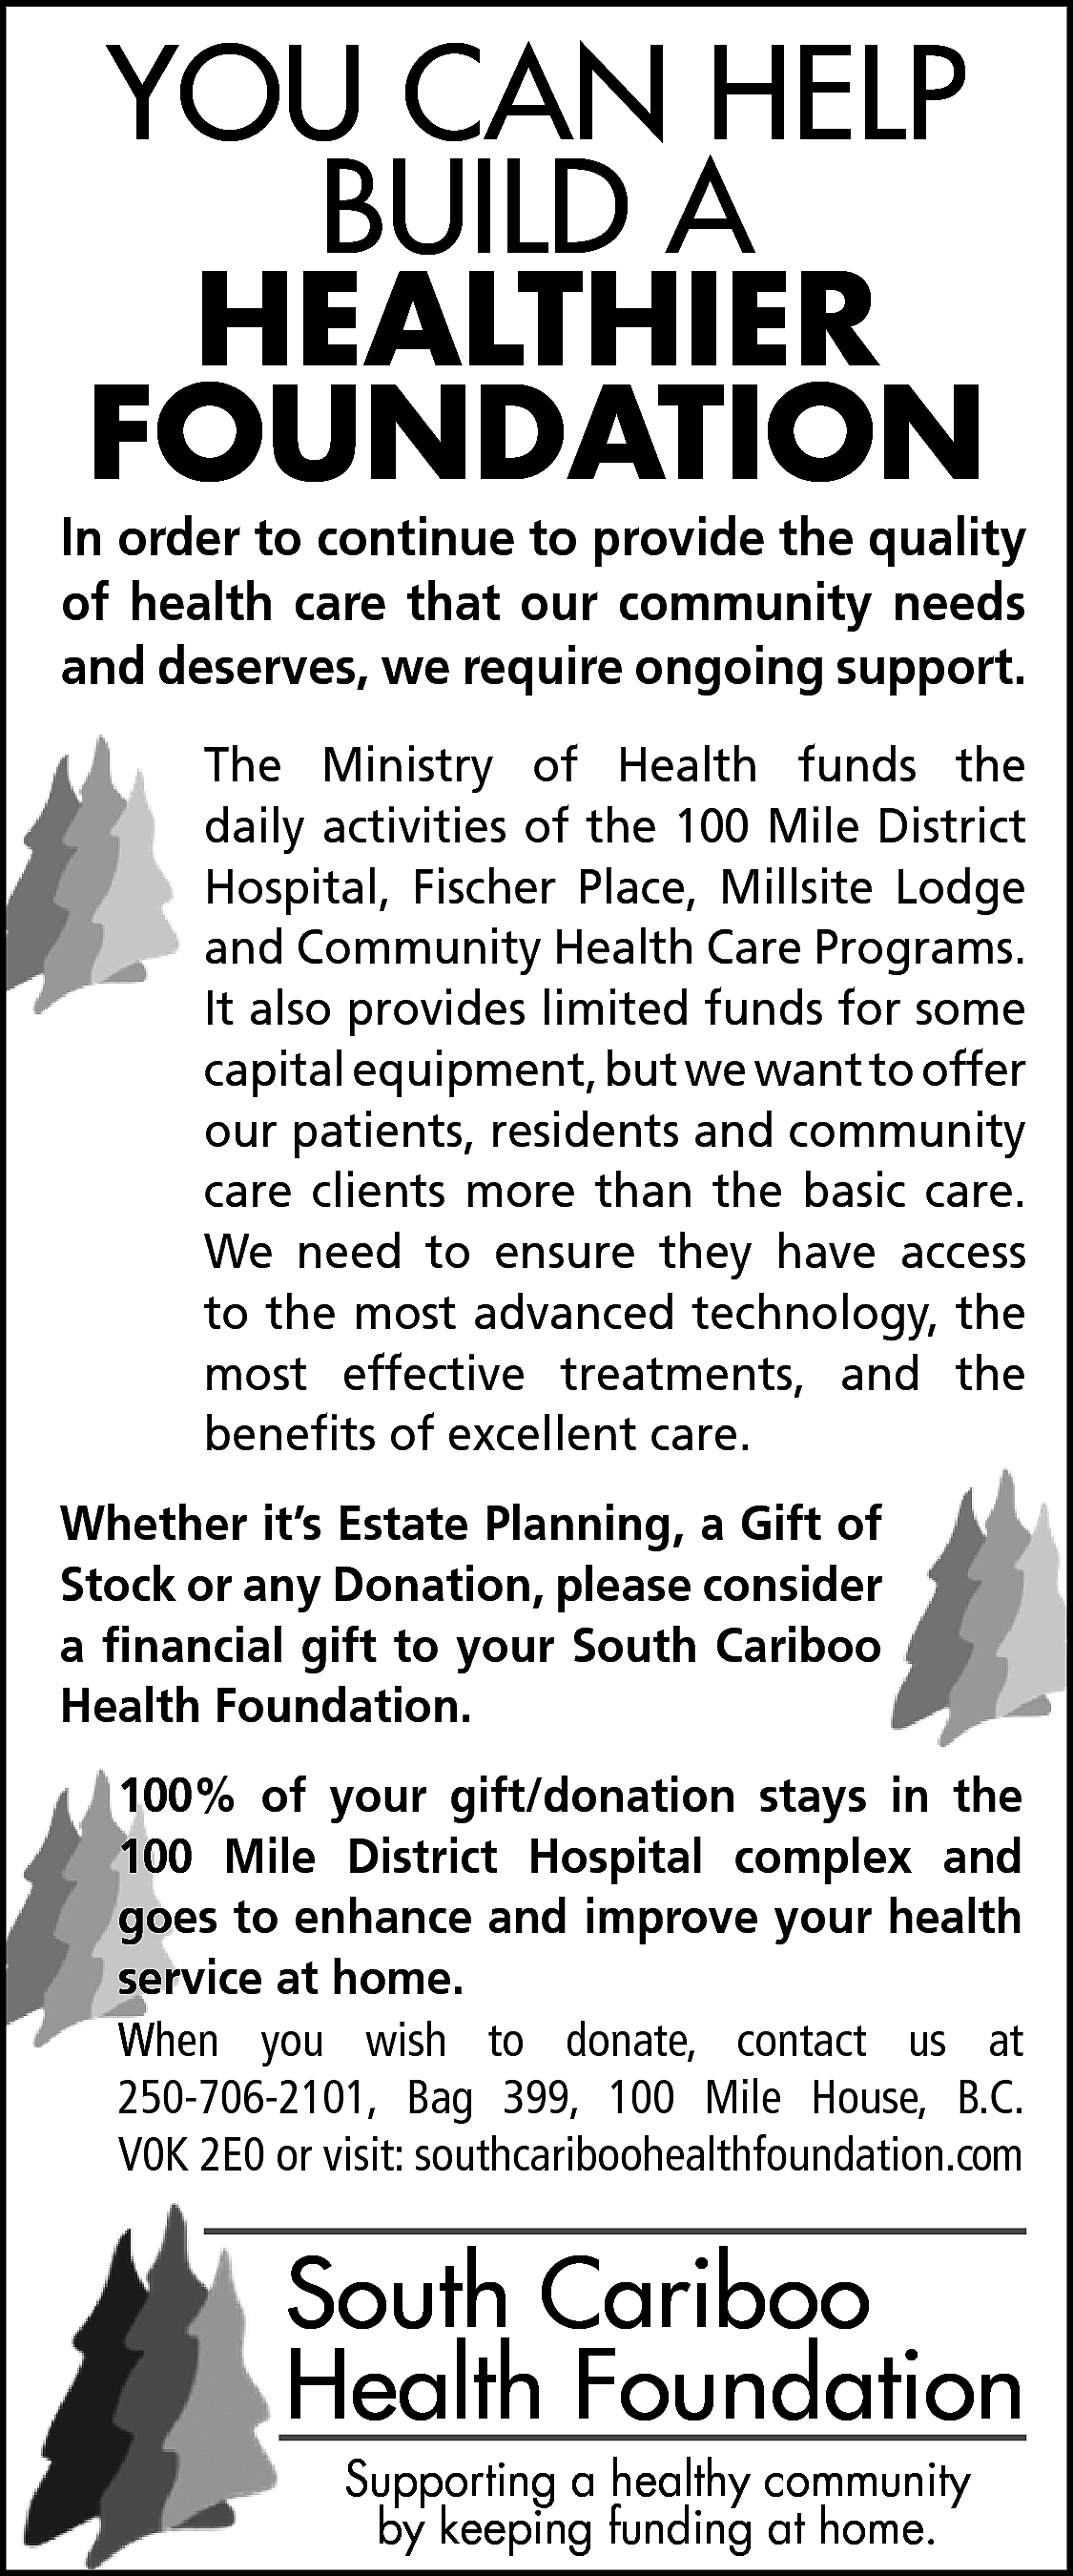 YOU CAN HELP <br>BUILD A  YOU CAN HELP  BUILD A  HEALTHIER  FOUNDATION    In order to continue to provide the quality  of health care that our community needs  and deserves, we require ongoing support.  The Ministry of Health funds the  daily activities of the 100 Mile District  Hospital, Fischer Place, Millsite Lodge  and Community Health Care Programs.  It also provides limited funds for some  capital equipment, but we want to offer  our patients, residents and community  care clients more than the basic care.  We need to ensure they have access  to the most advanced technology, the  most effective treatments, and the  benefits of excellent care.  Whether it’s Estate Planning, a Gift of  Stock or any Donation, please consider  a financial gift to your South Cariboo  Health Foundation.  100% of your gift/donation stays in the  100 Mile District Hospital complex and  goes to enhance and improve your health  service at home.    When you wish to donate, contact us at  250-706-2101, Bag 399, 100 Mile House, B.C.  V0K 2E0 or visit: southcariboohealthfoundation.com    South Cariboo  Health Foundation  Supporting a healthy community  by keeping funding at home.    